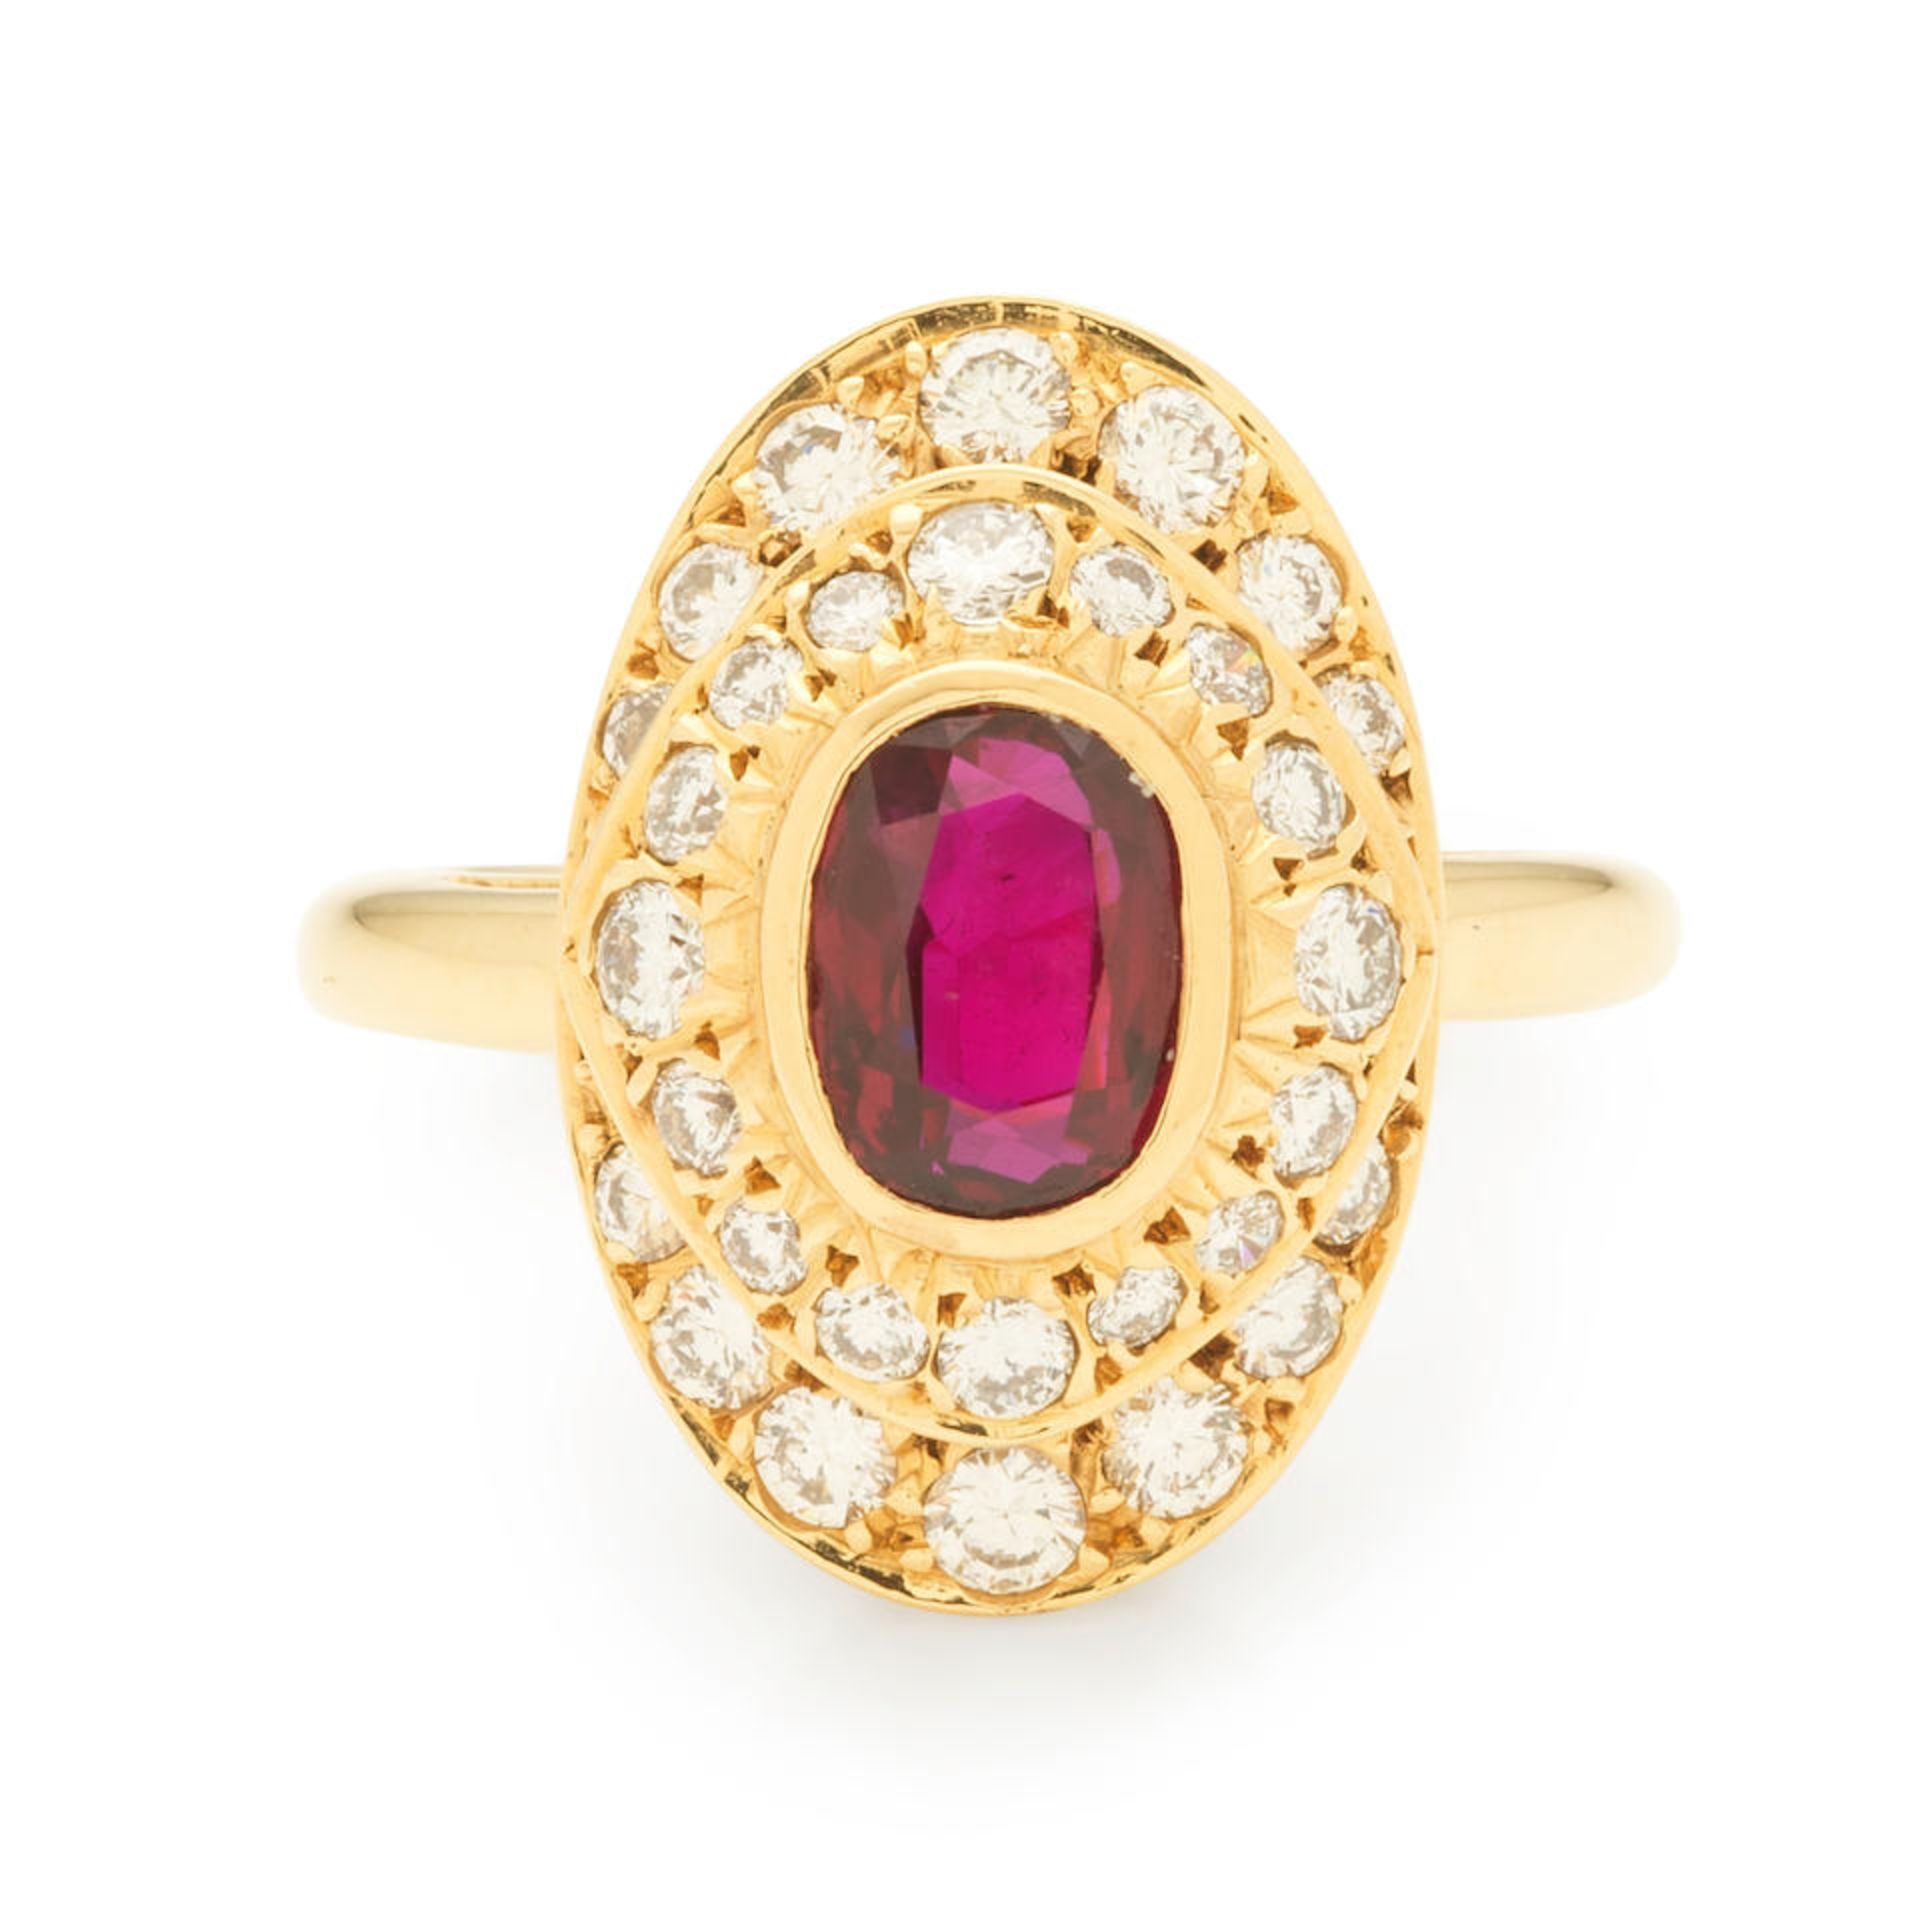 FROHMANN FRERES: BAGUE RUBIS ET DIAMANTS FROHMANN FRERES: RUBY AND DIAMOND RING